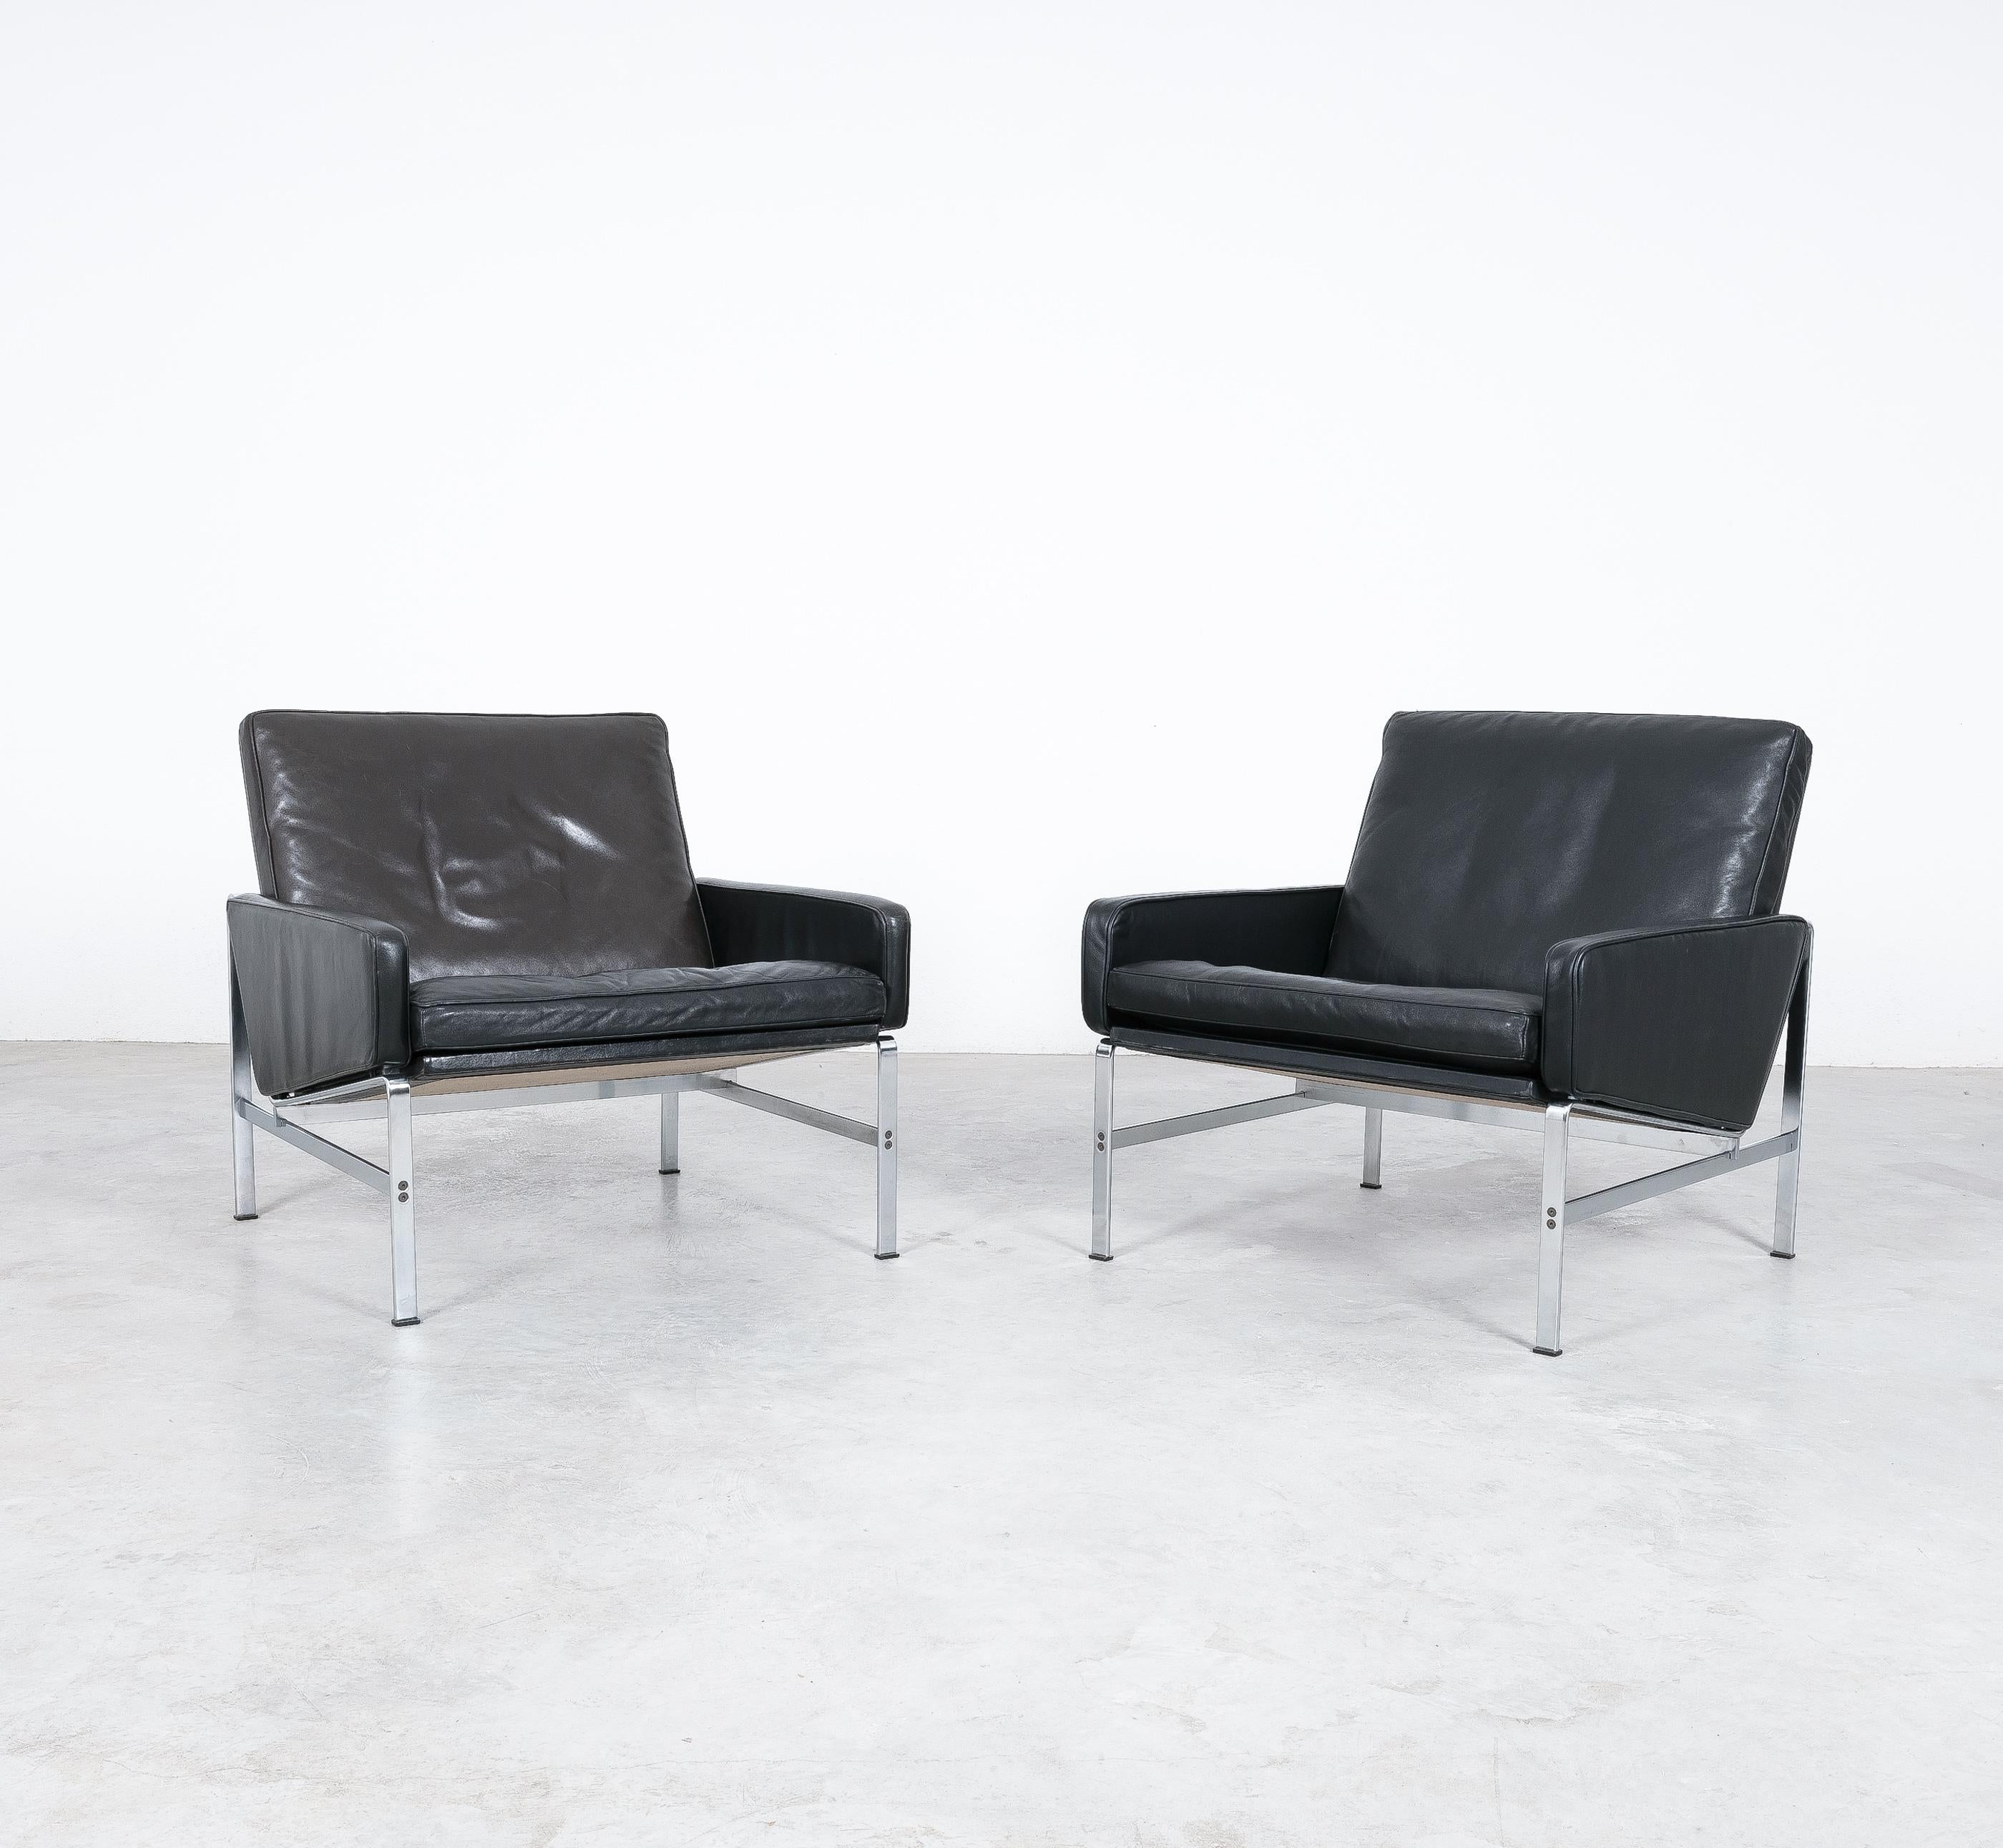 Pair of lounge chairs model FK6720, designed by Fabricius & Kastholm for Kill International in 1968, labelled

A beautiful pair of mod. 6720 mid-century chairs in very good original condition coming with the hard to find full-leather armrests. These